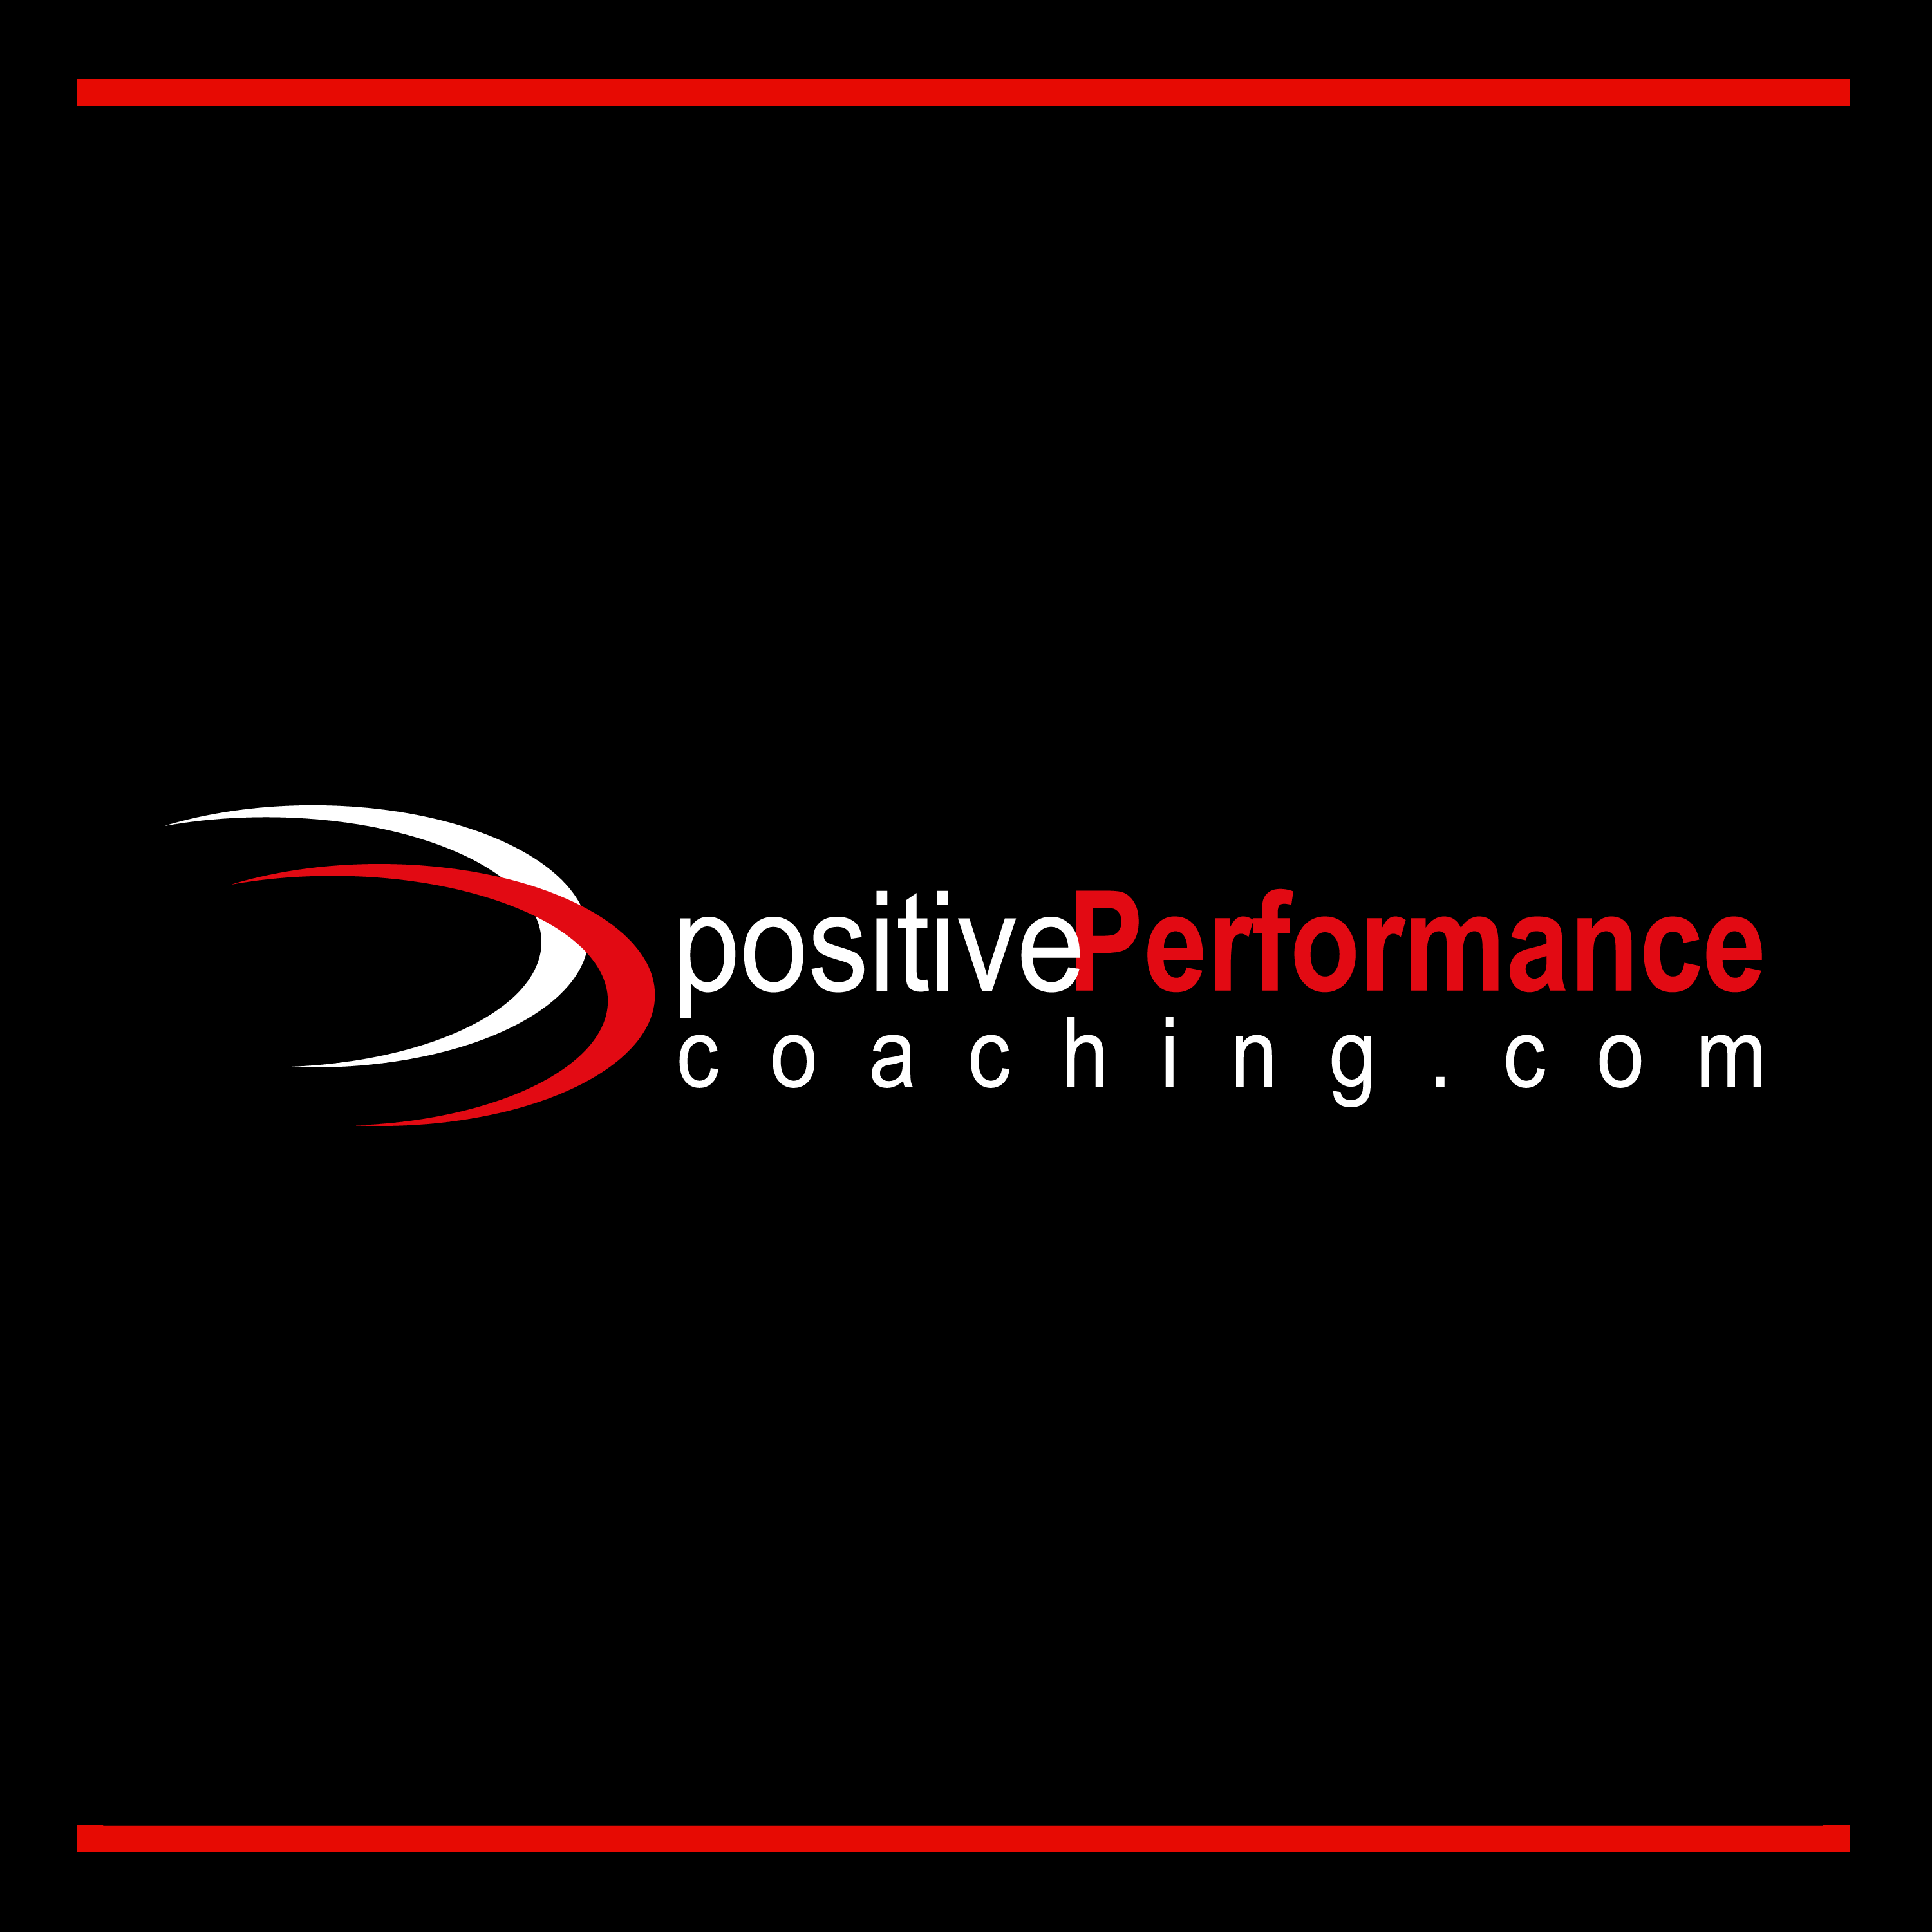 Club Image for POSITIVE COACHING